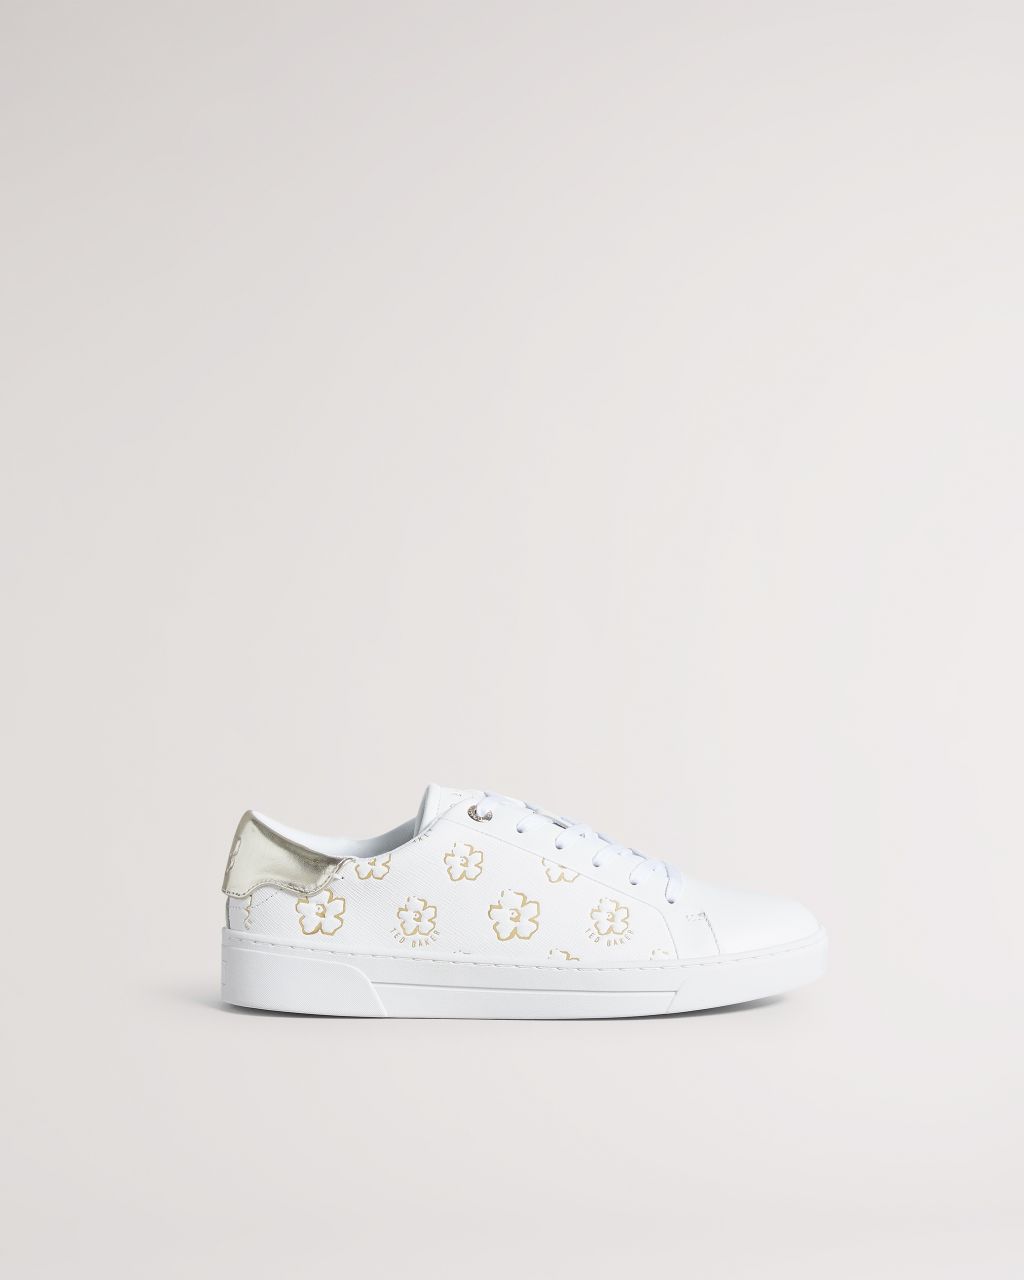 Ted Baker Women's Magnolia Flower Cupsole Trainer in White-Gold, Taliy, Leather